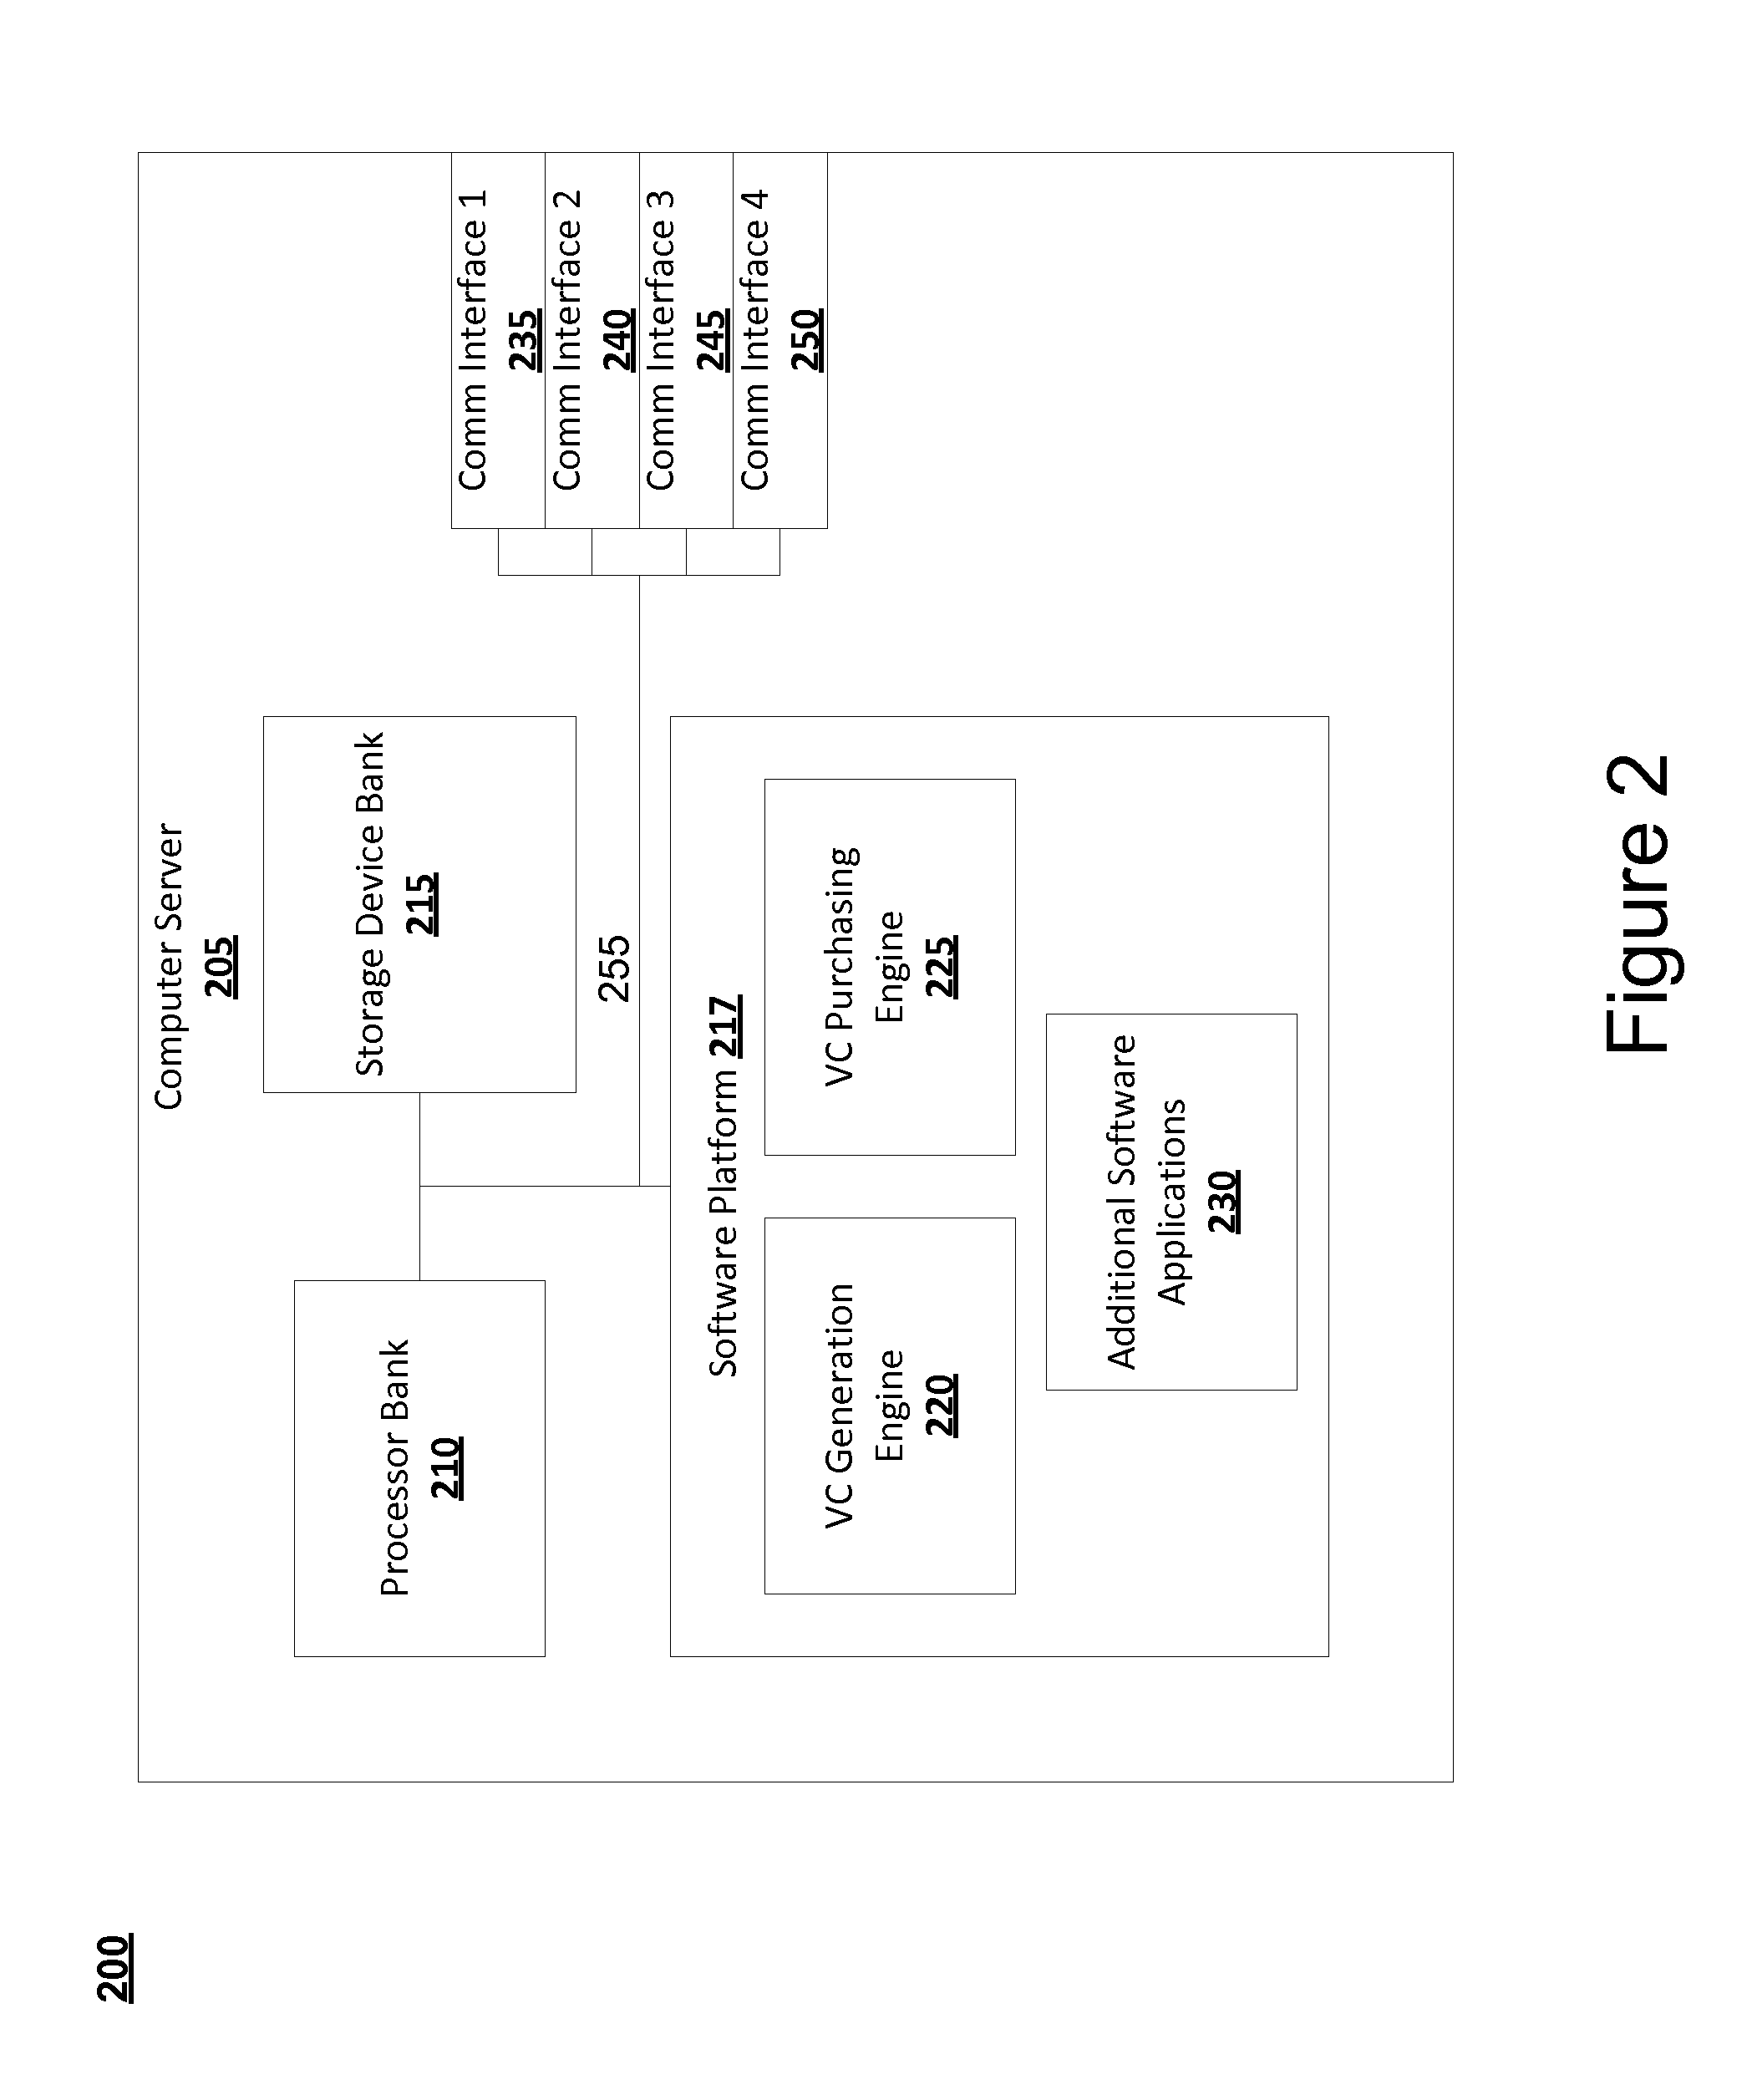 Systems, devices, and methods for virtual collectible generation, trading, purchasing, and management